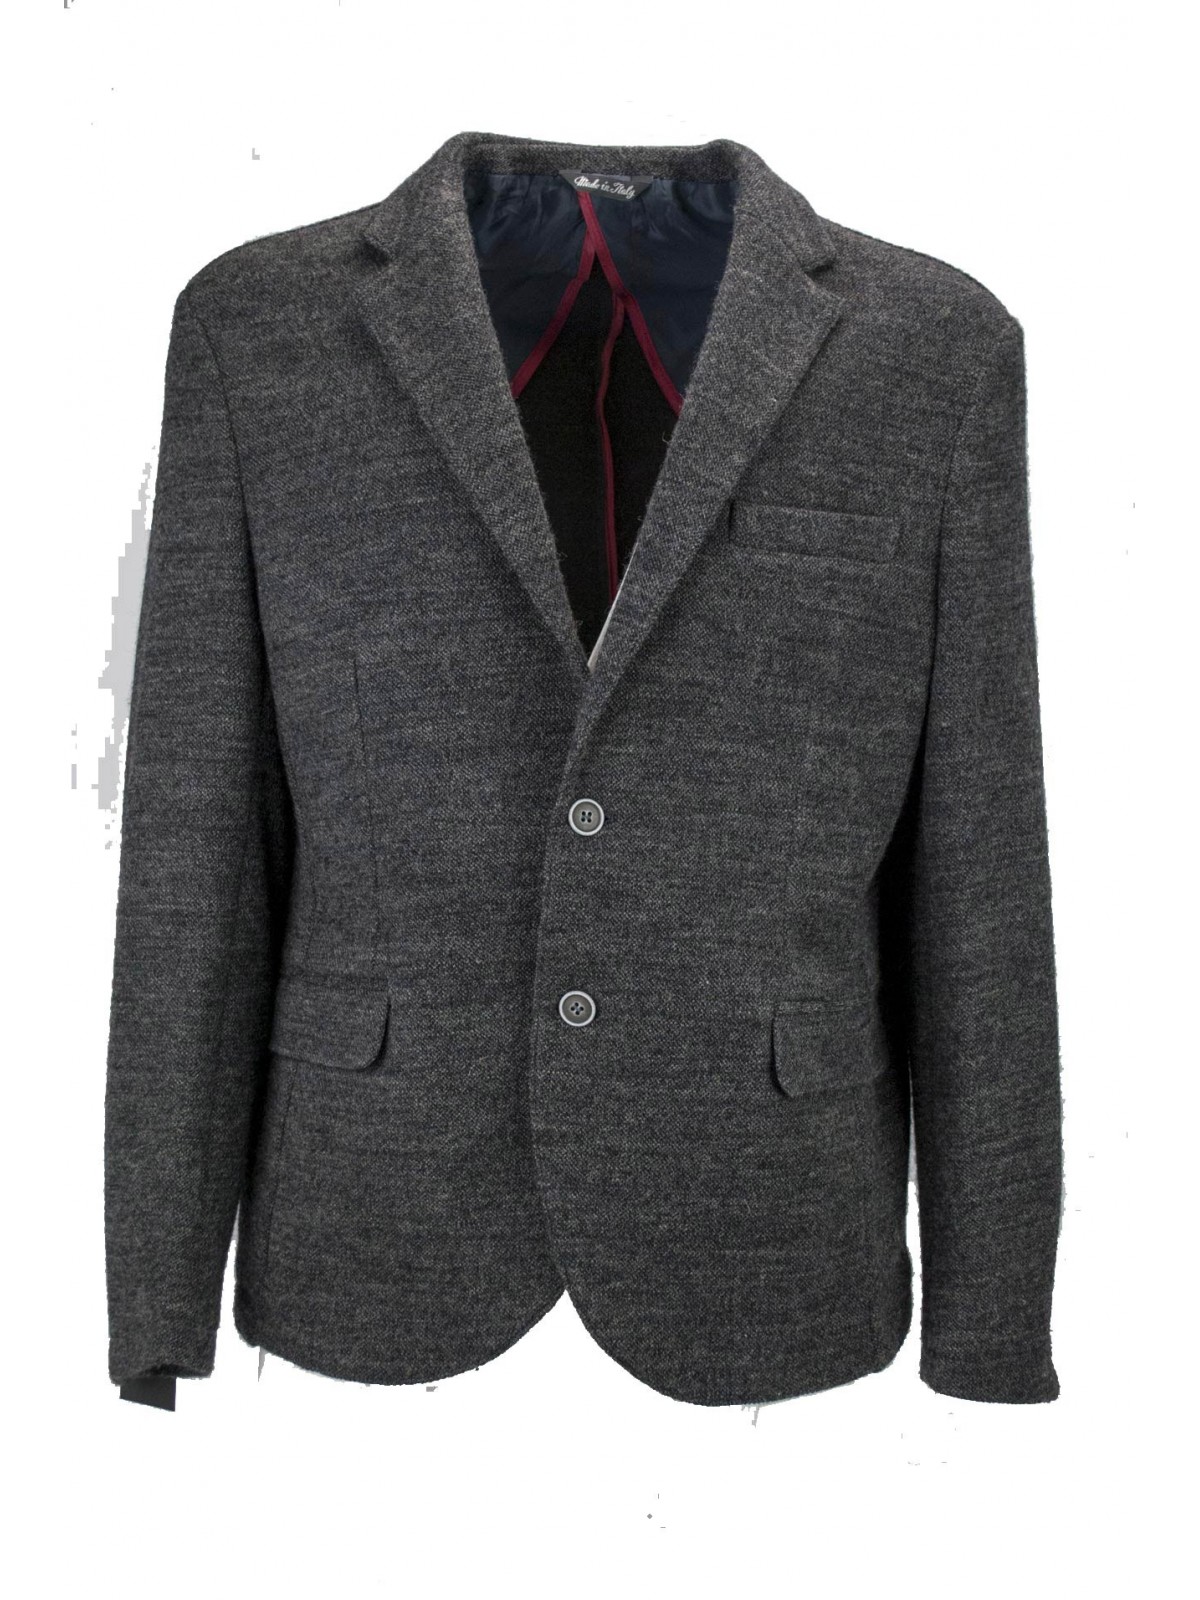 Herenjas 52 Donkergrijs Grisaille Wol 2 Knopen - Slim Fit